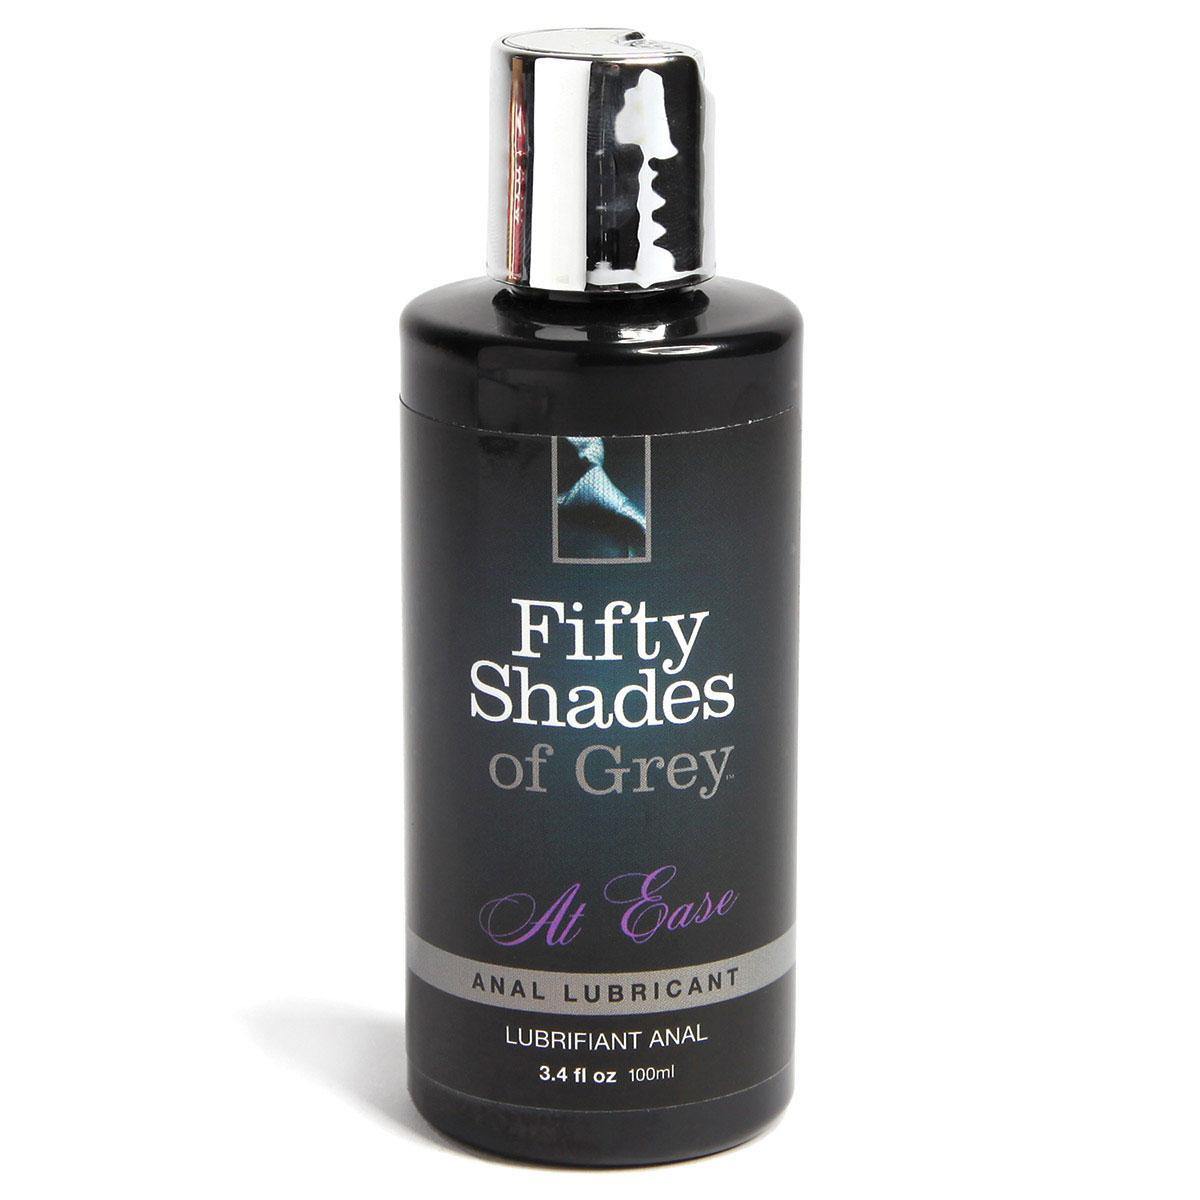 Fifty Shades At Ease Anal Lubricant 3.4oz - Buy At Luxury Toy X - Free 3-Day Shipping